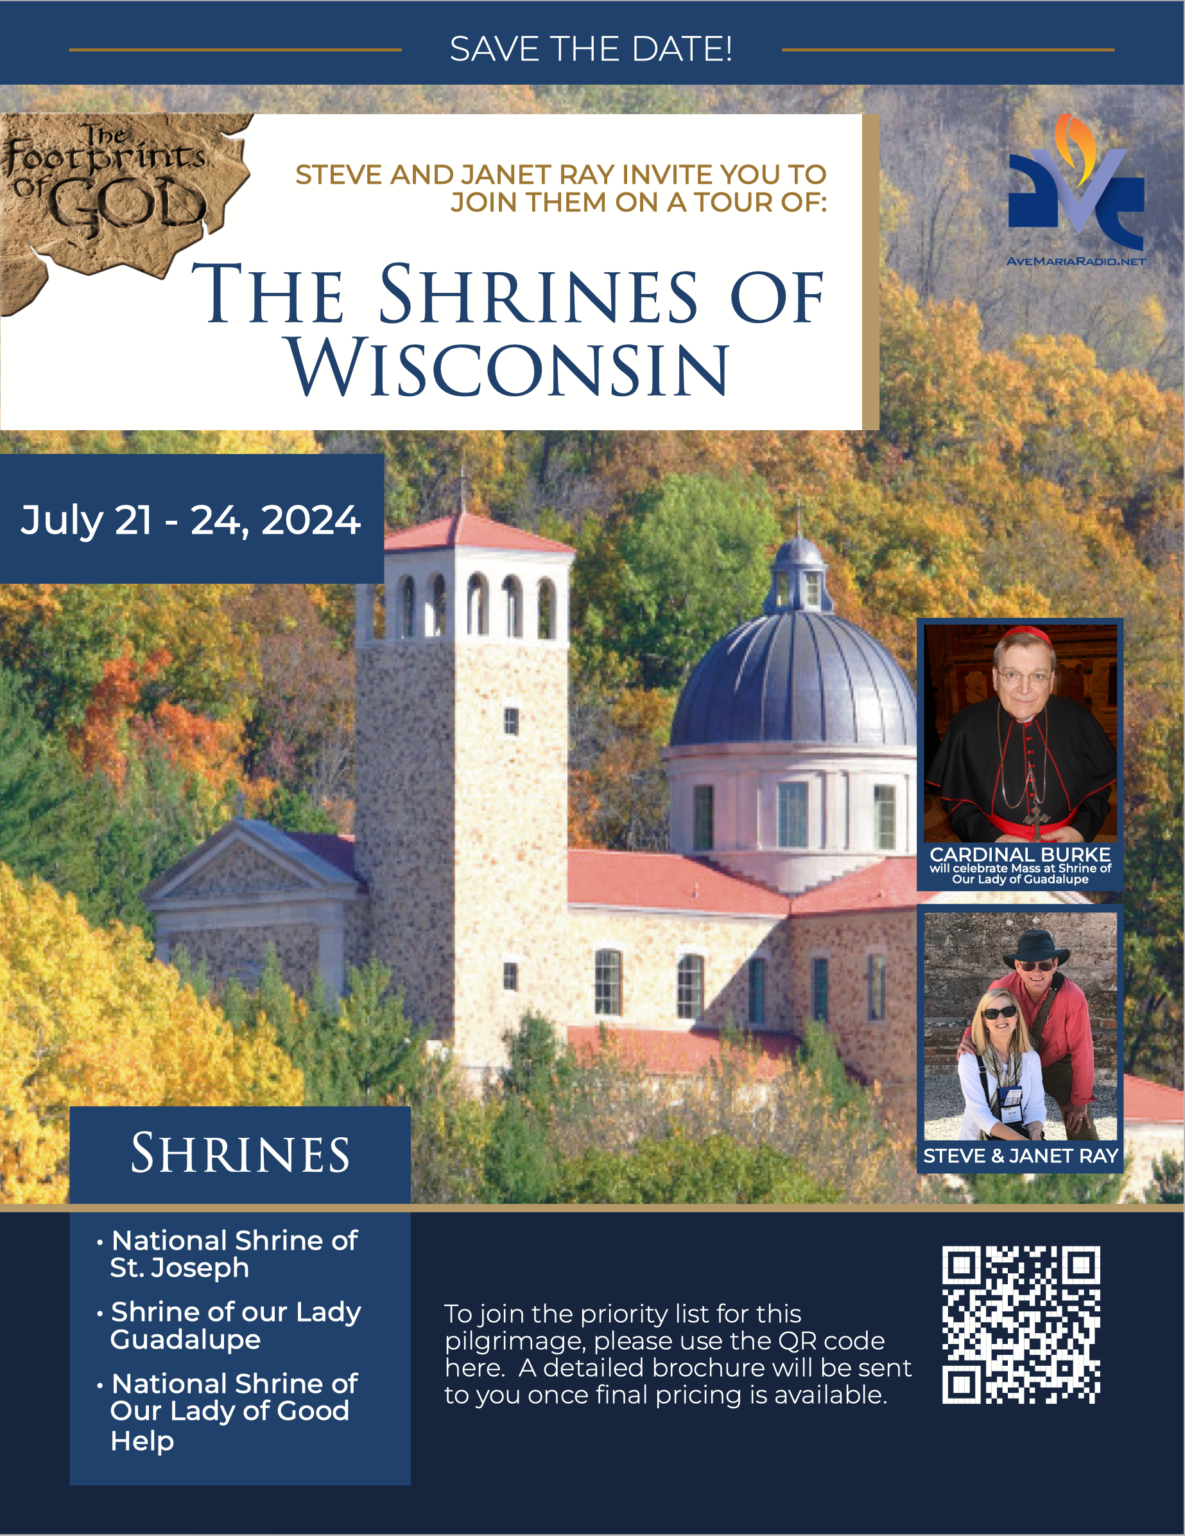 Shrines of Wisconsin with Steve & Ray and Cardinal Burke save